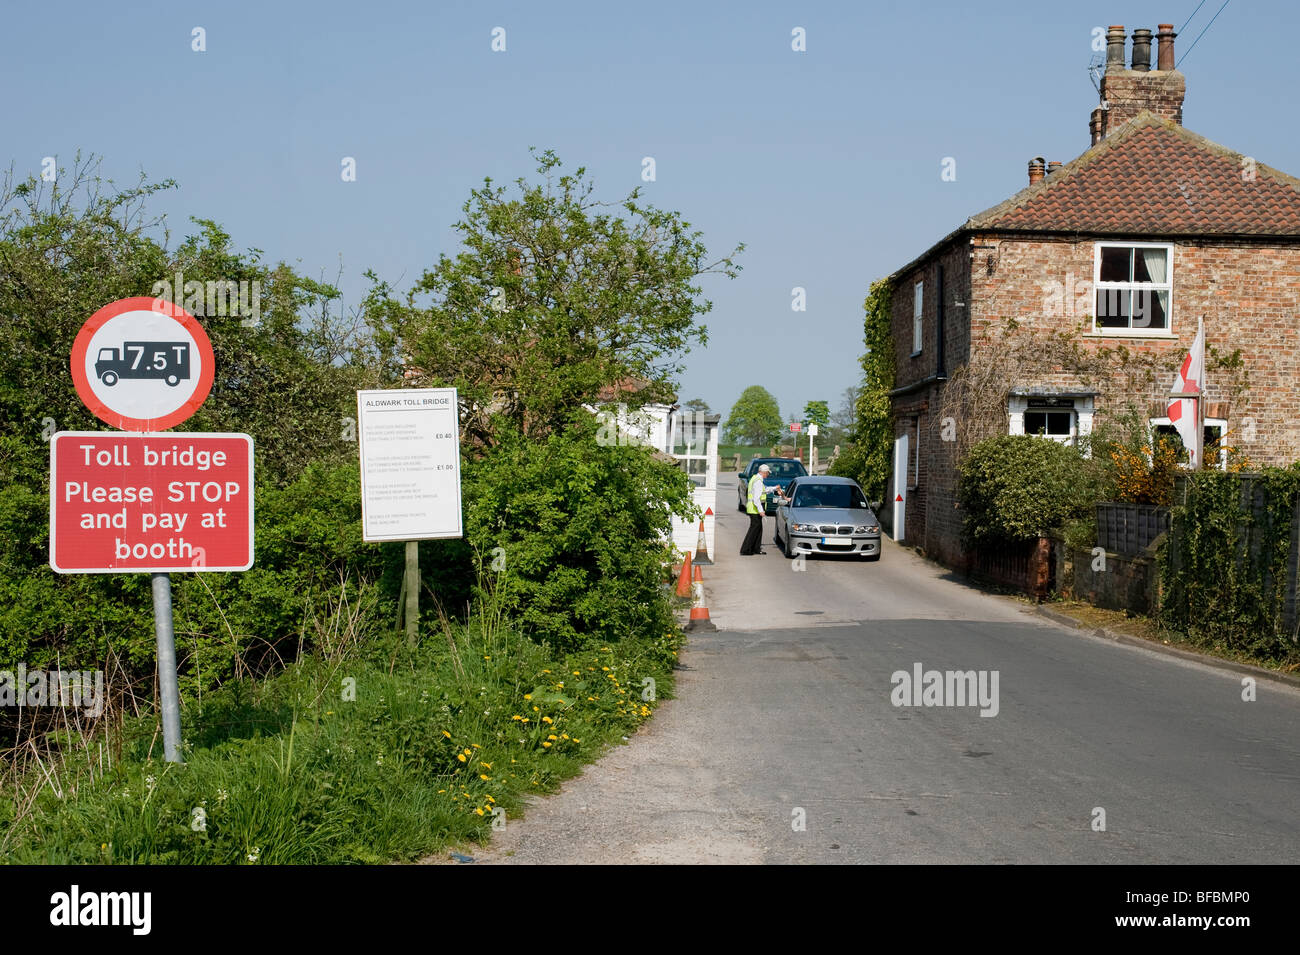 Car driver paying at Aldwark toll bridge, handing money to man on duty by booth. (Clear signage & toll keeper's house) - North Yorkshire, England, UK. Stock Photo